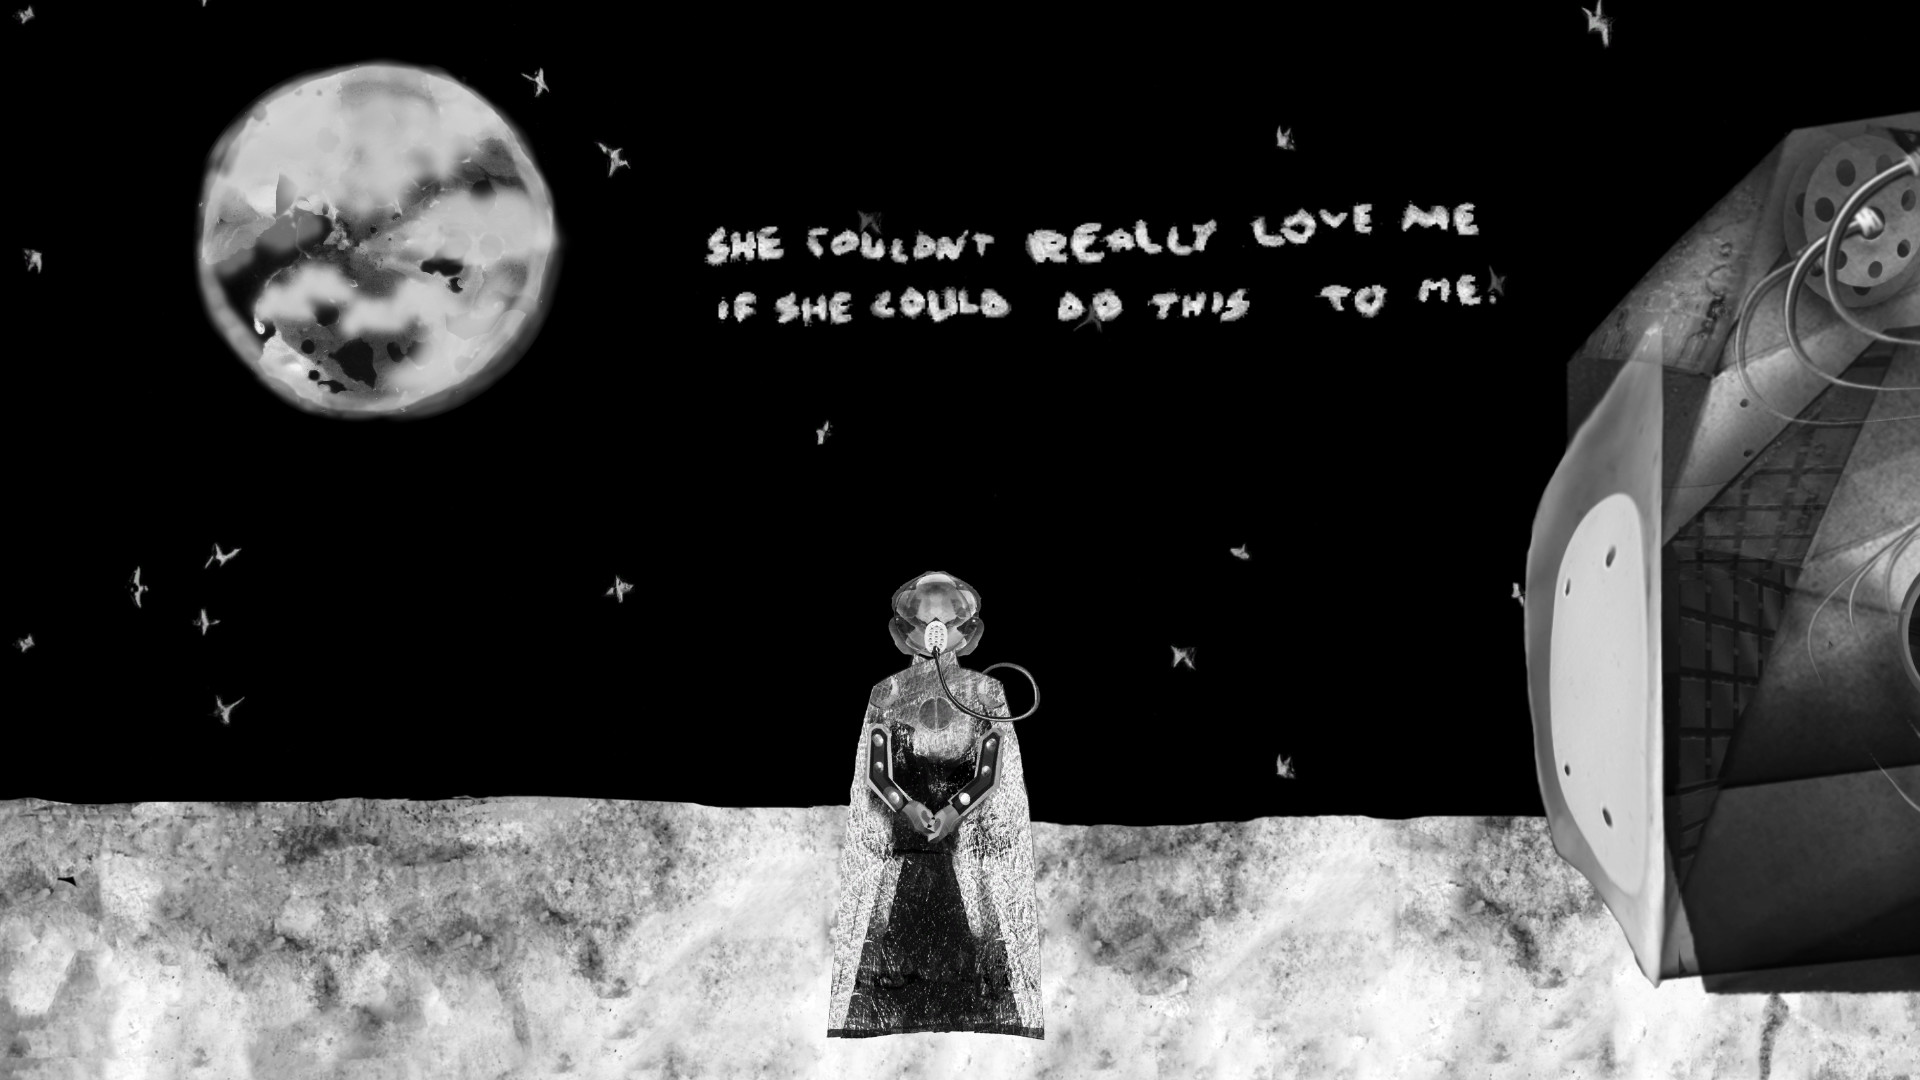 A figure staring at the moon. Text says 'She couldn't really love me if she would do this to me.'